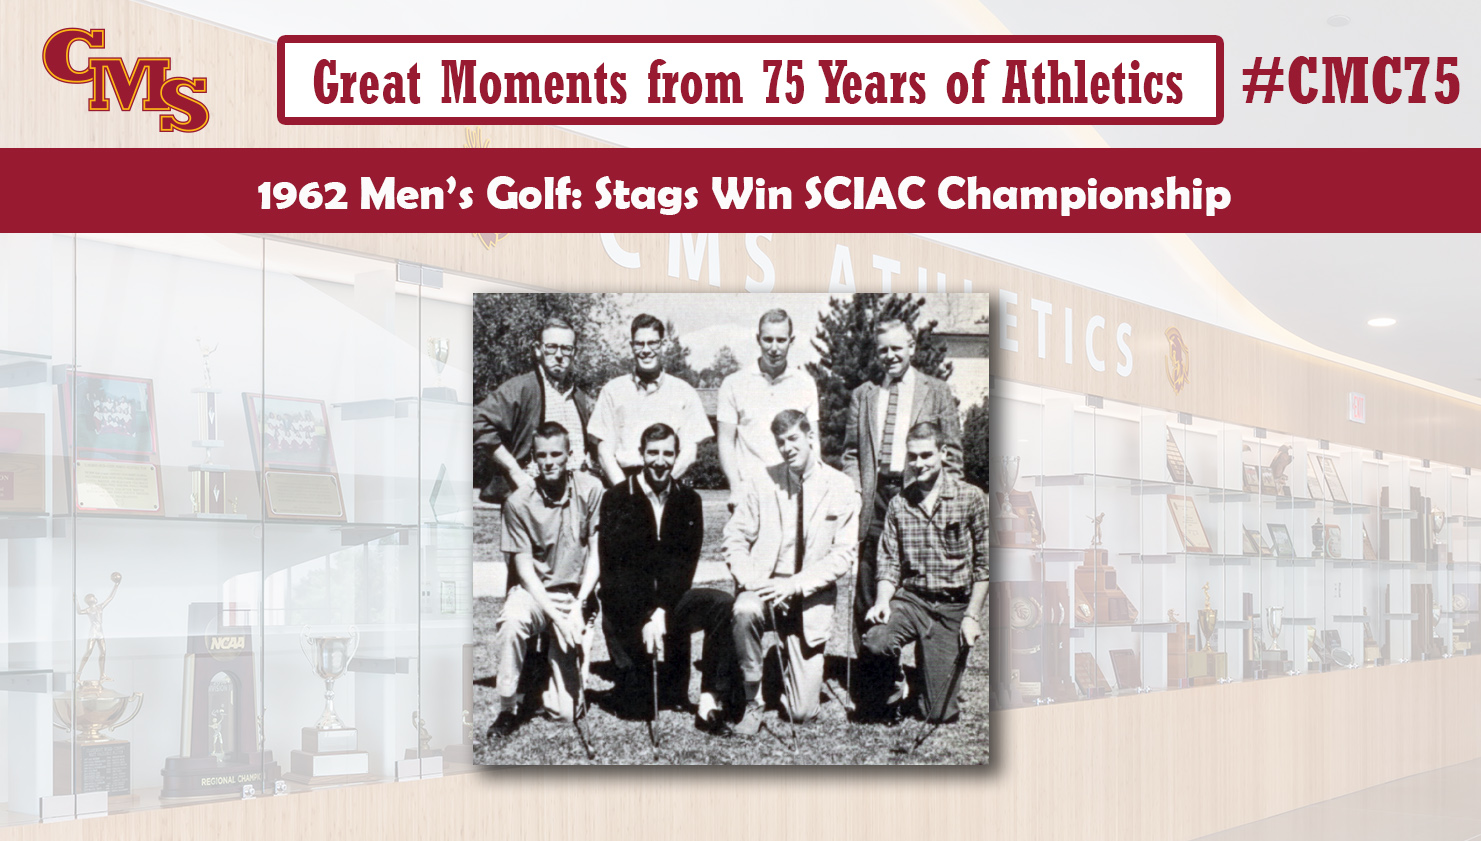 The 1962 CMS men's golf team. Words over the photo read: Great Moments from 75 Years of Athletics. 1962 Men's Golf: Stags Win SCIAC Championship